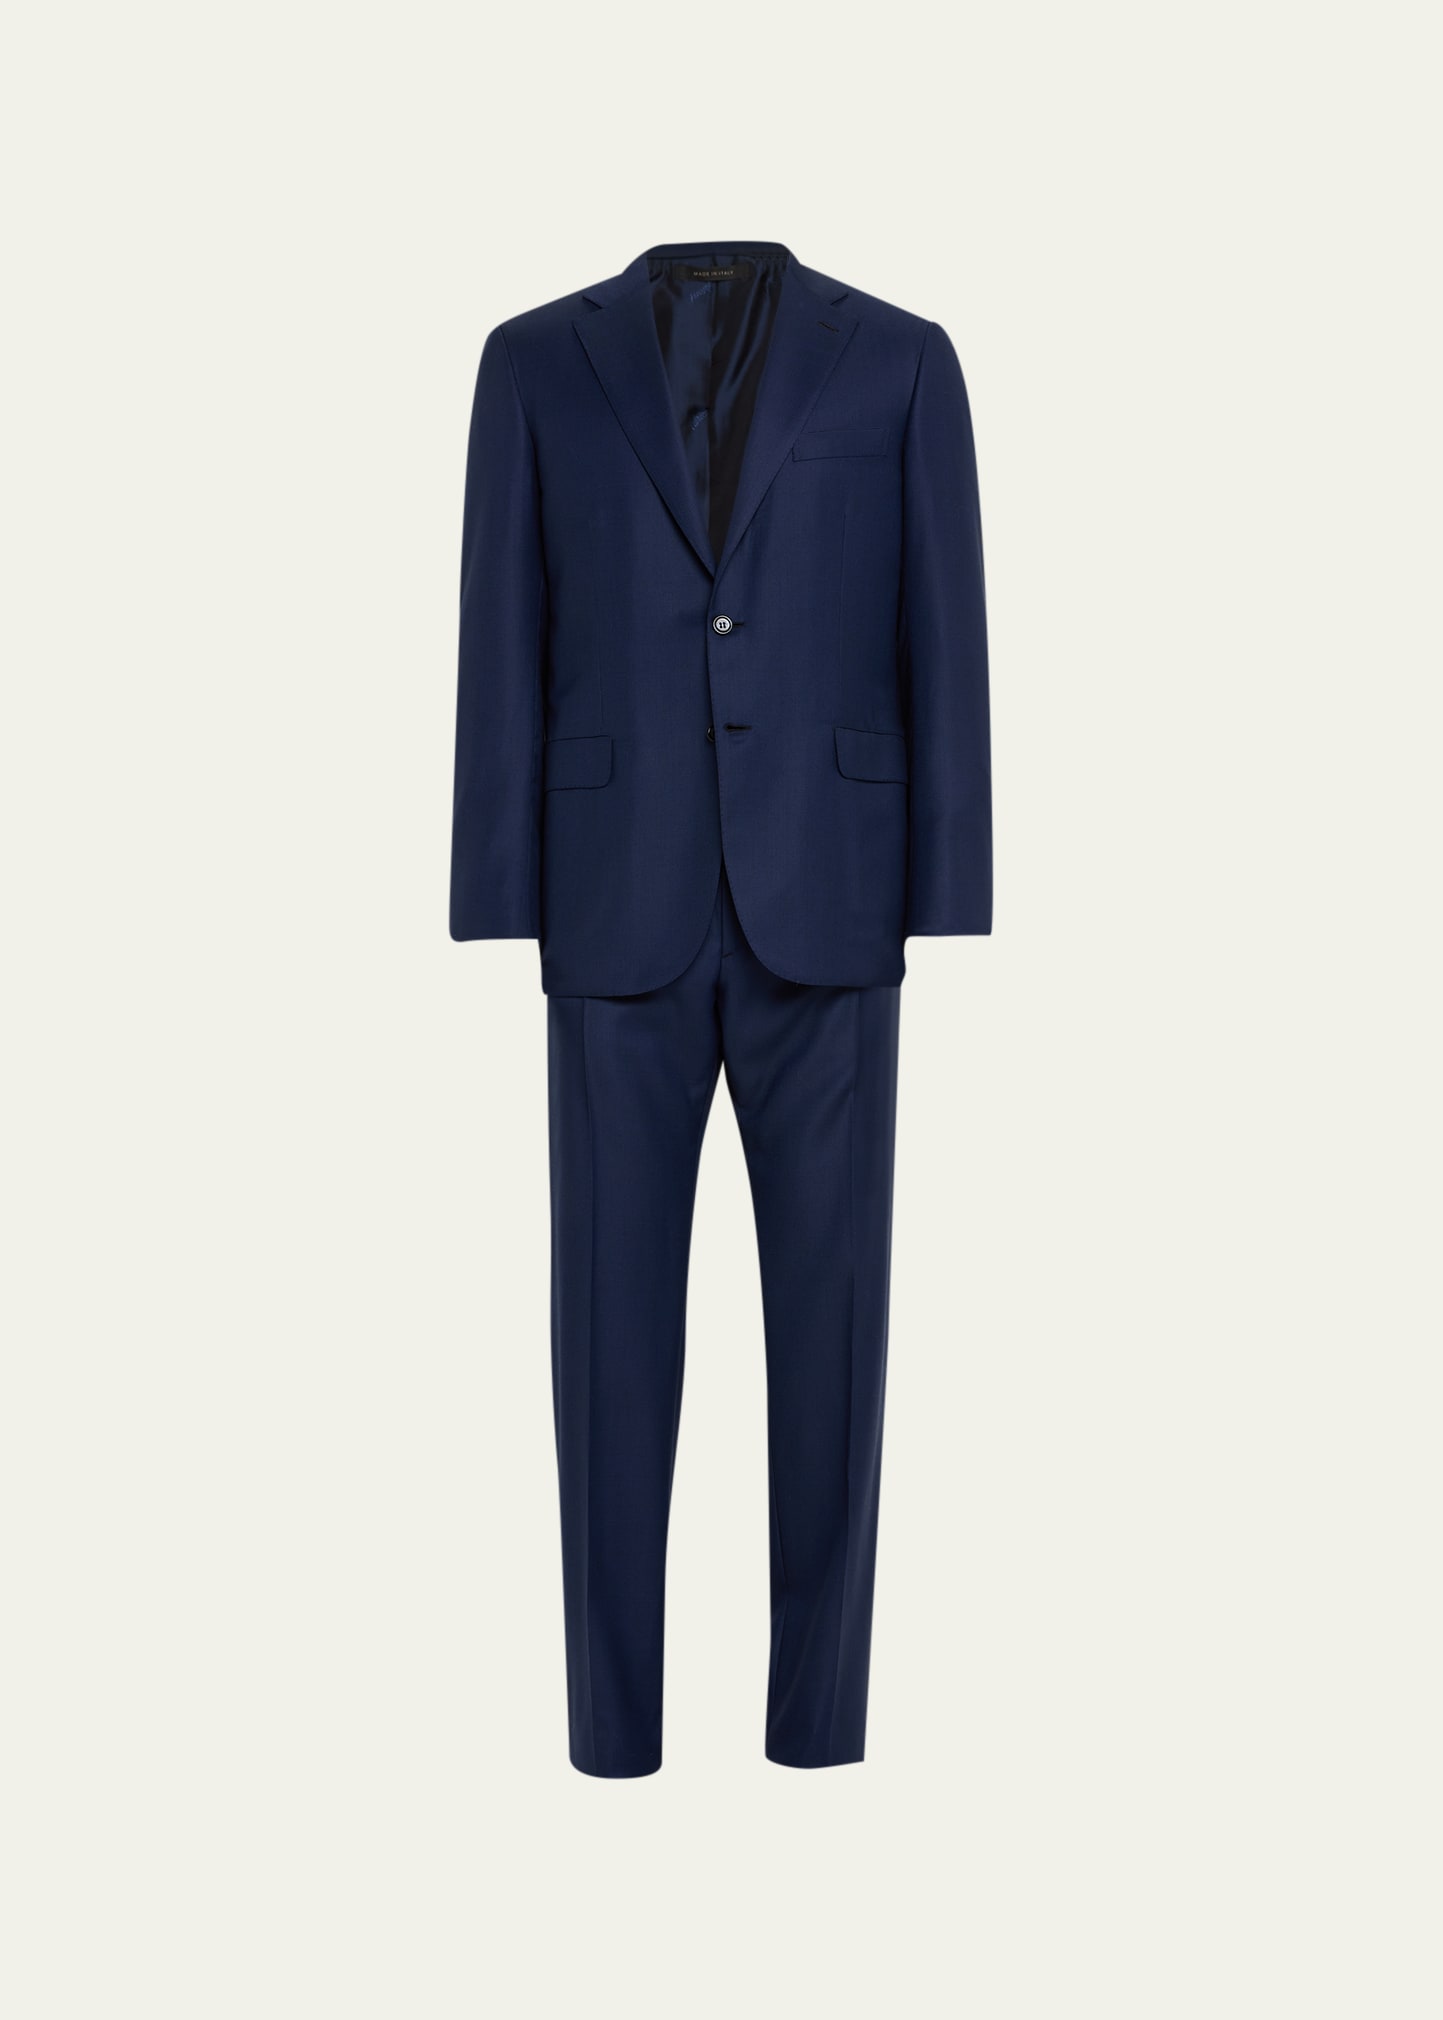 Brioni Men's Textured Solid Two-piece Suit, Bright Navy